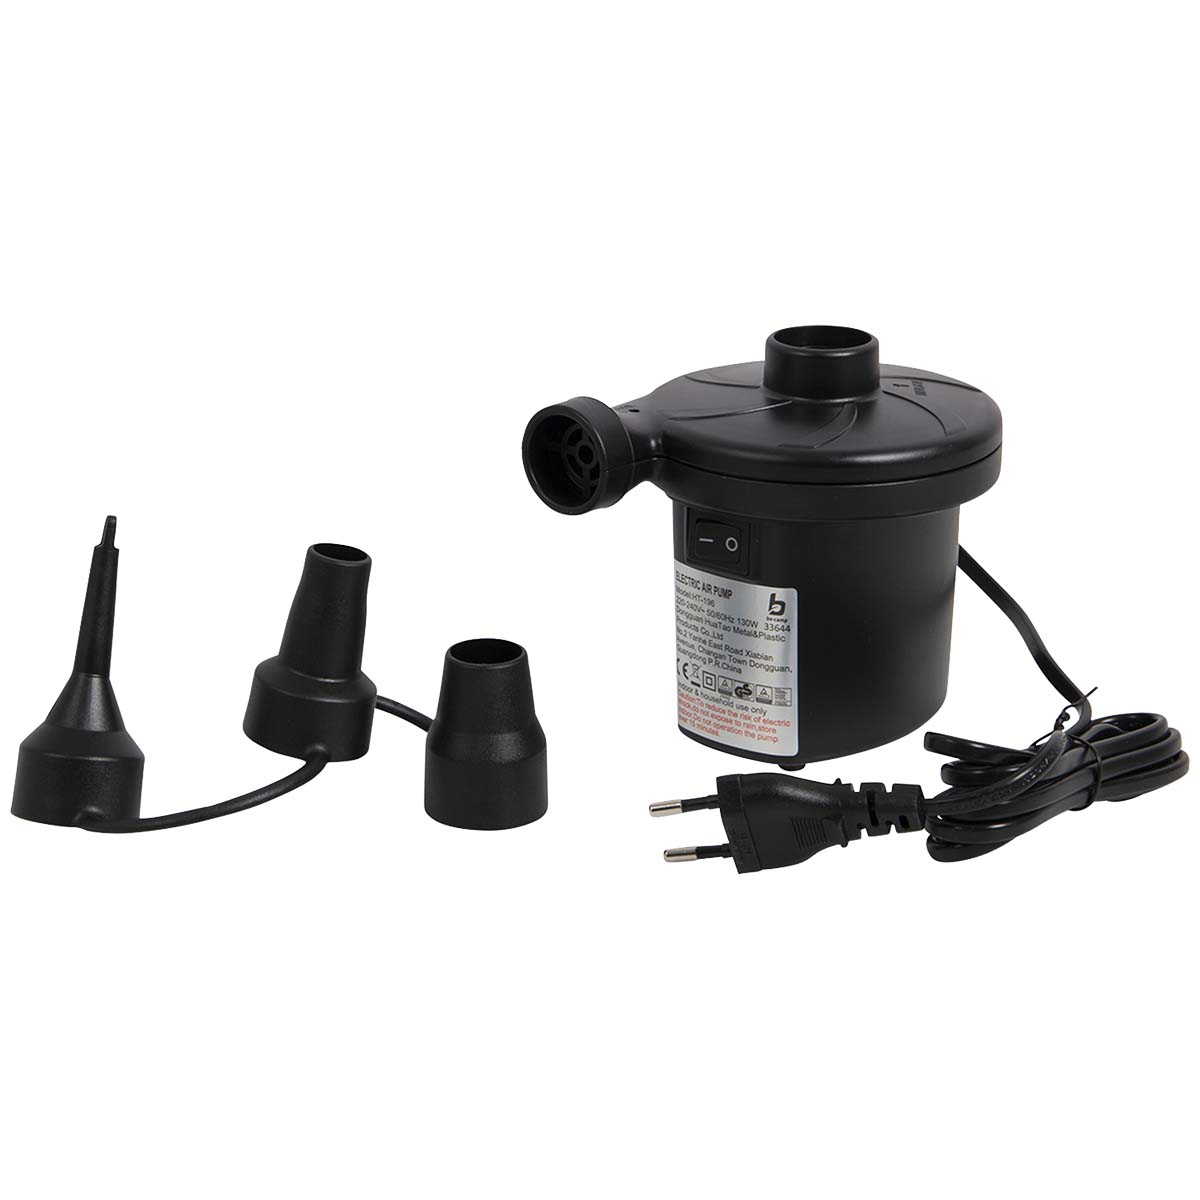 3807174 An electric pump for inflating and deflating an air mattress, inflatable boat, toys, etc. Suitable for a 230 Volt connection. This pump has an air flow of 450 litre per minute. Comes complete with reducers.